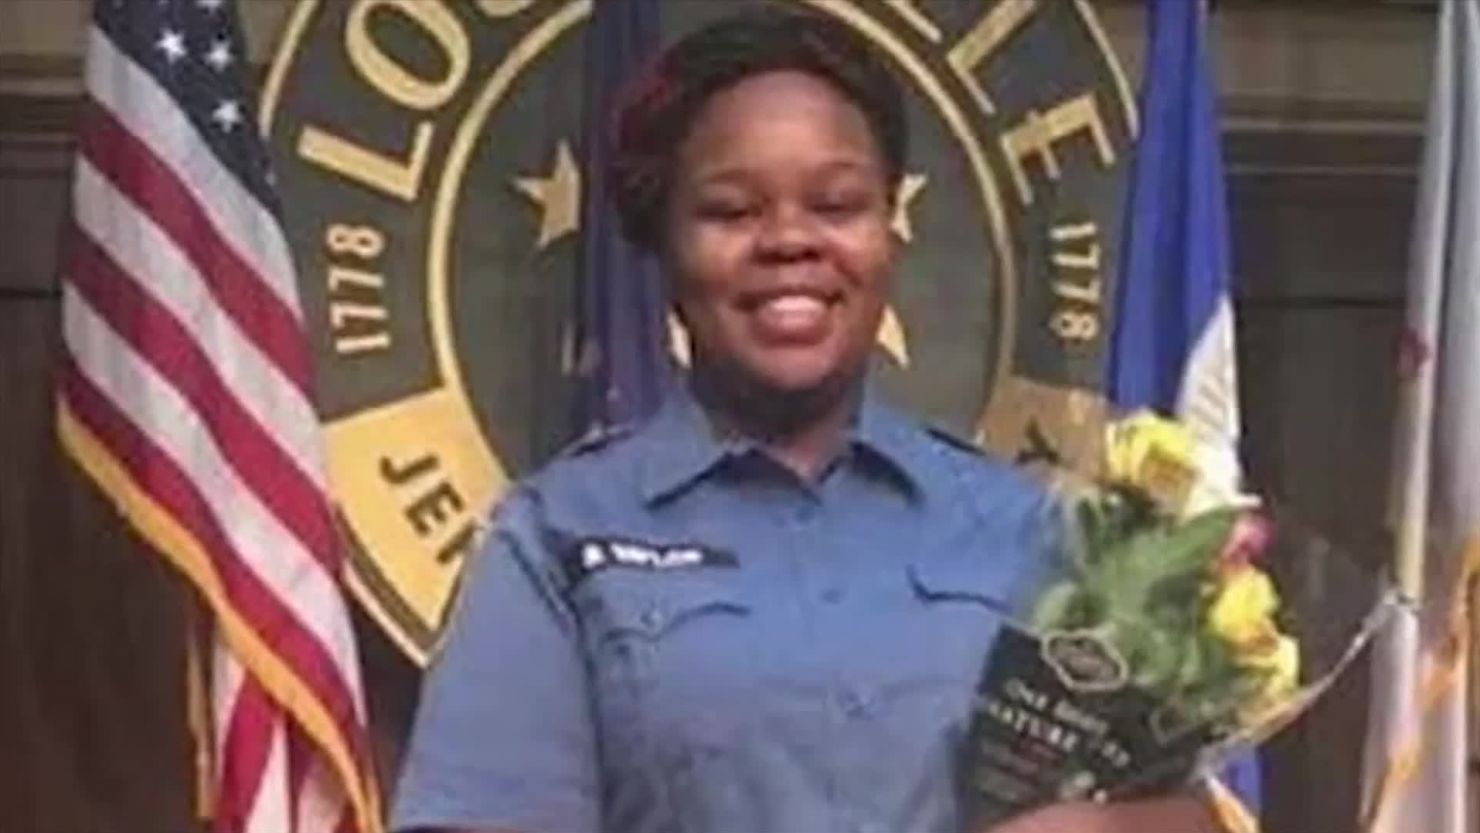 Breonna Taylor, 26, was killed during a police raid of her Kentucky apartment. Now, the Louisville Metro Police Department will change its policy to require body cameras and change search warrant sign-offs. 